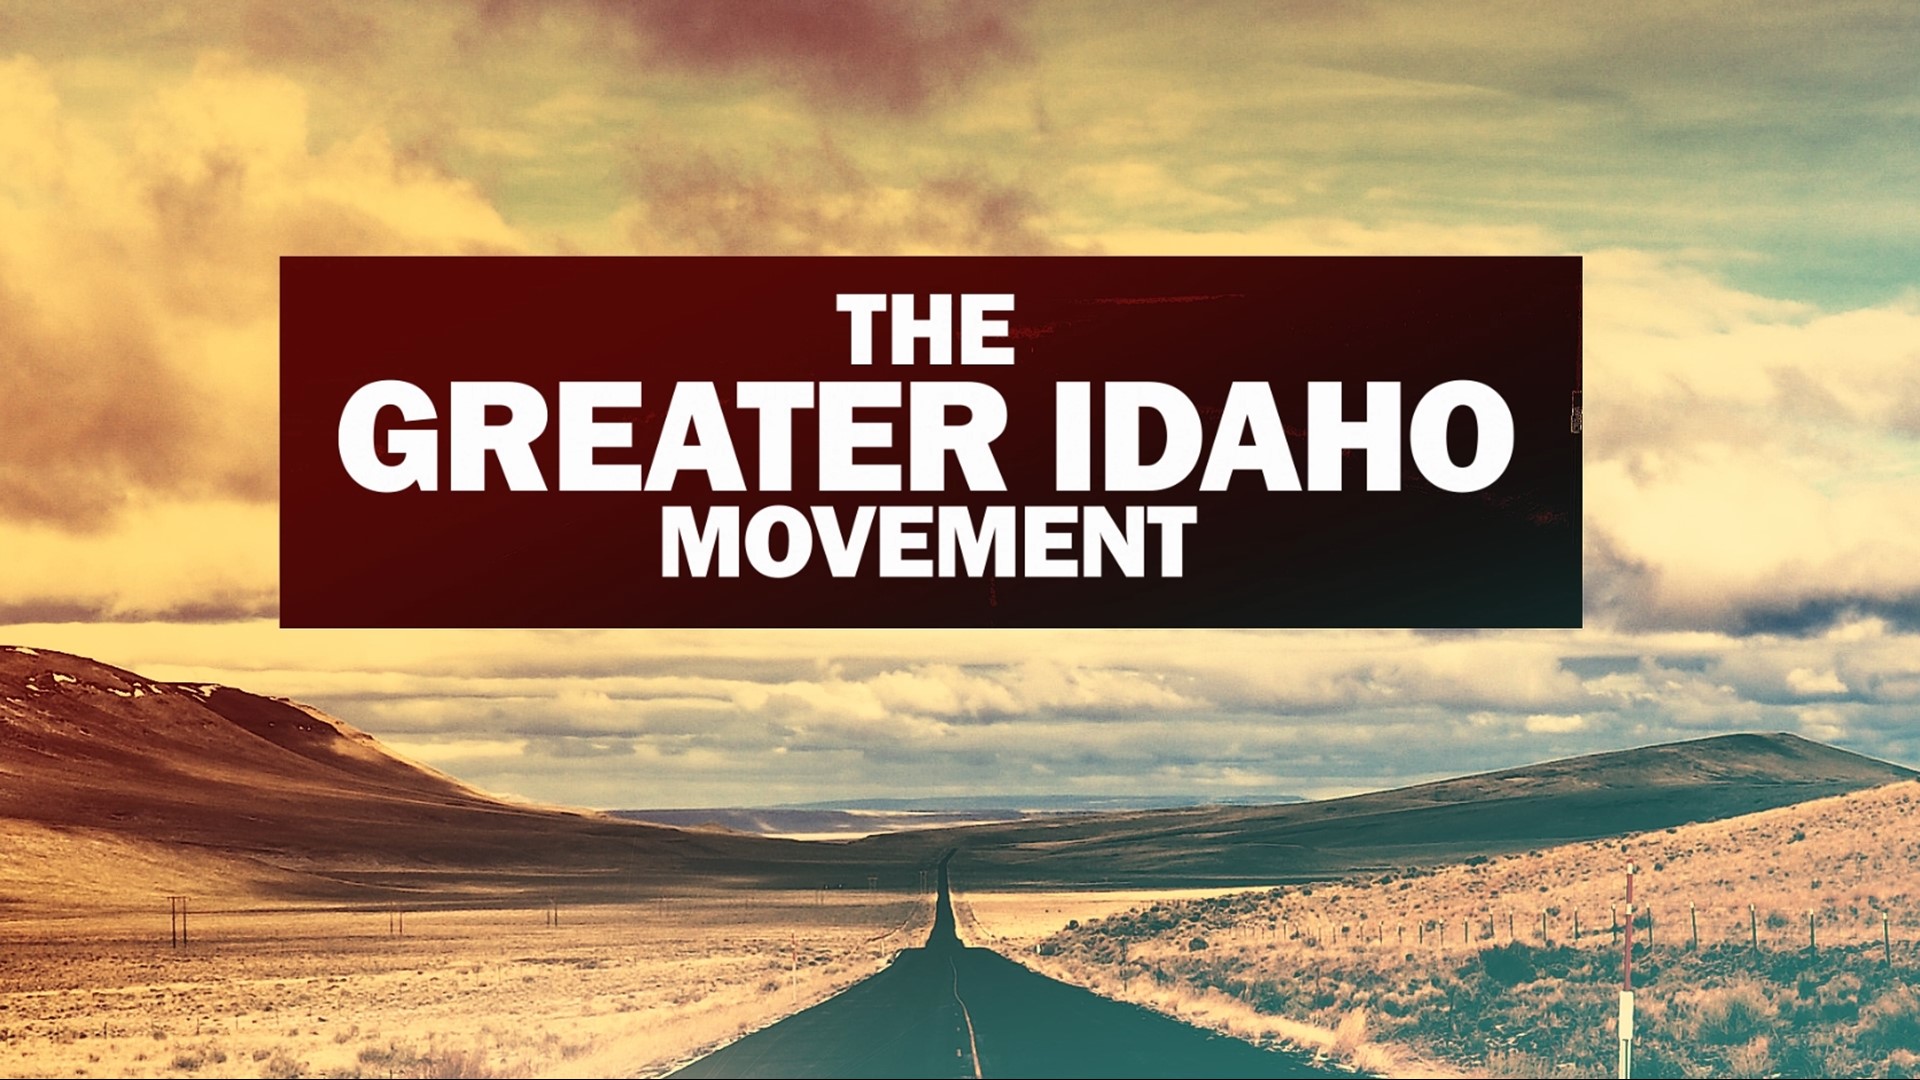 The "Greater Idaho" movement has been gaining steam throughout eastern Oregon. Residents explained why they want to leave.